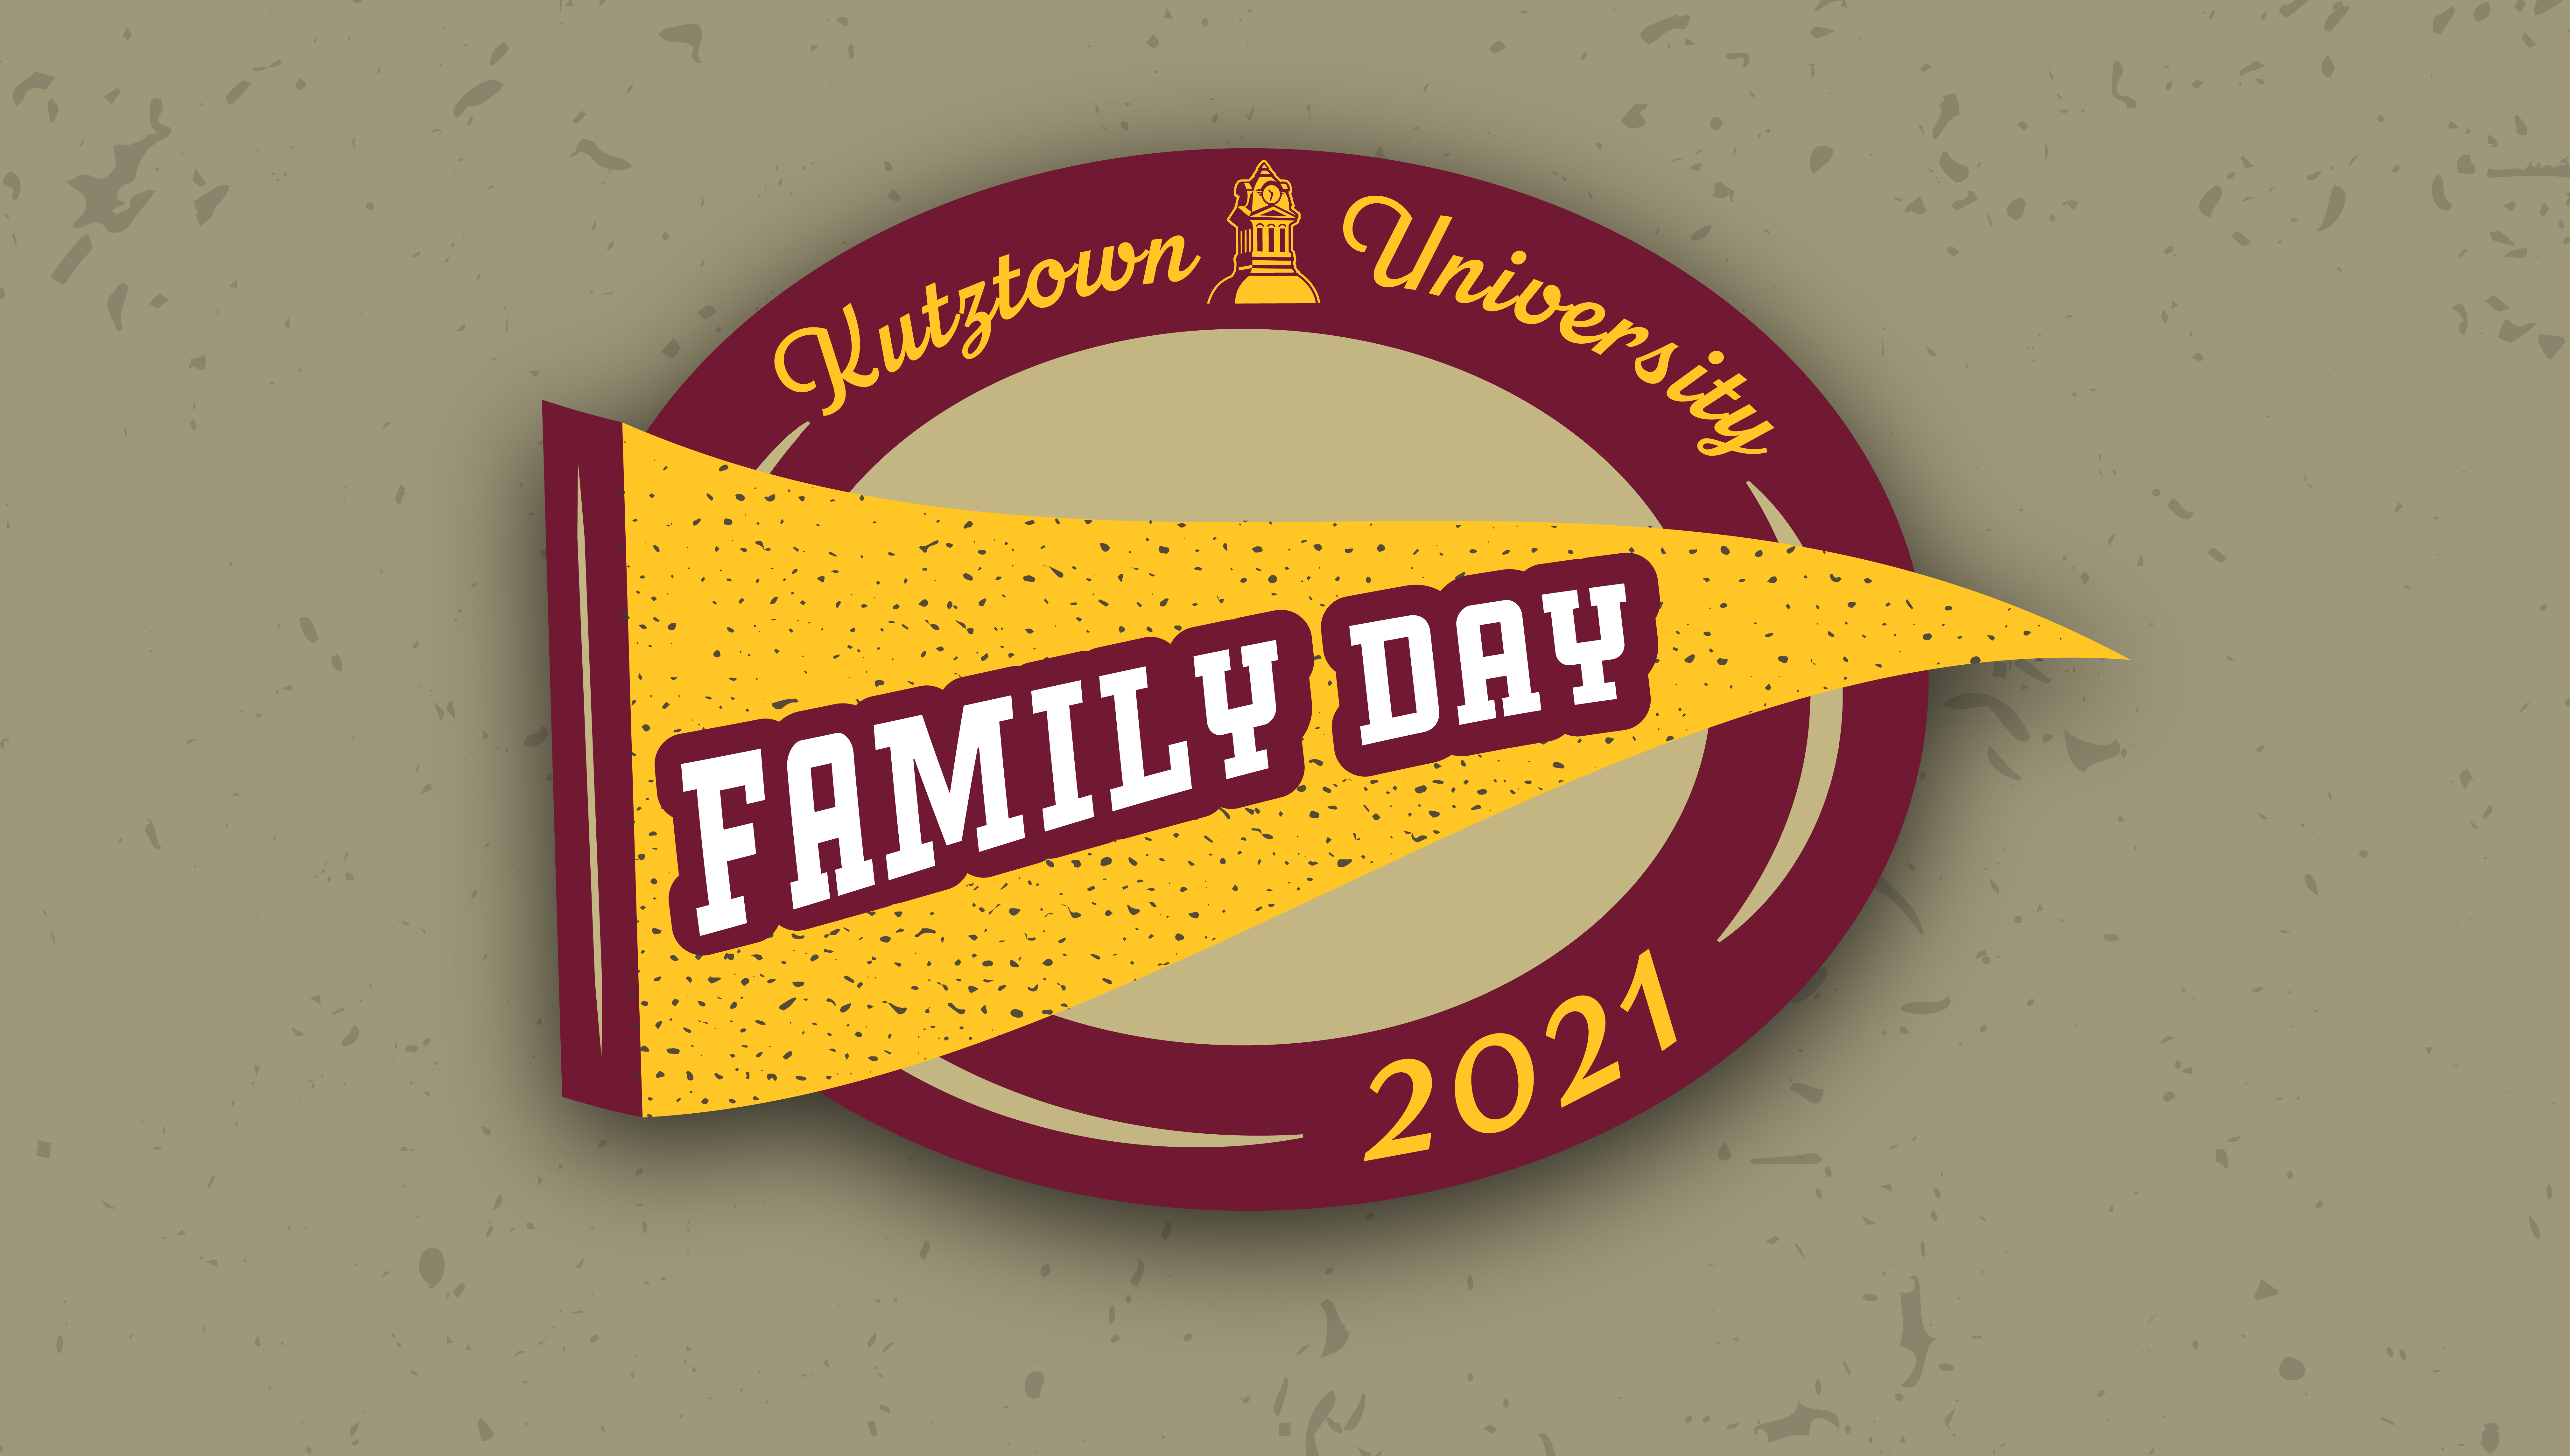 Graphic of a flag that reads "FAMILY DAY" in the Kutztown University maroon and gold colors with a logo behind the flag that reads "Kutztown University 2021"